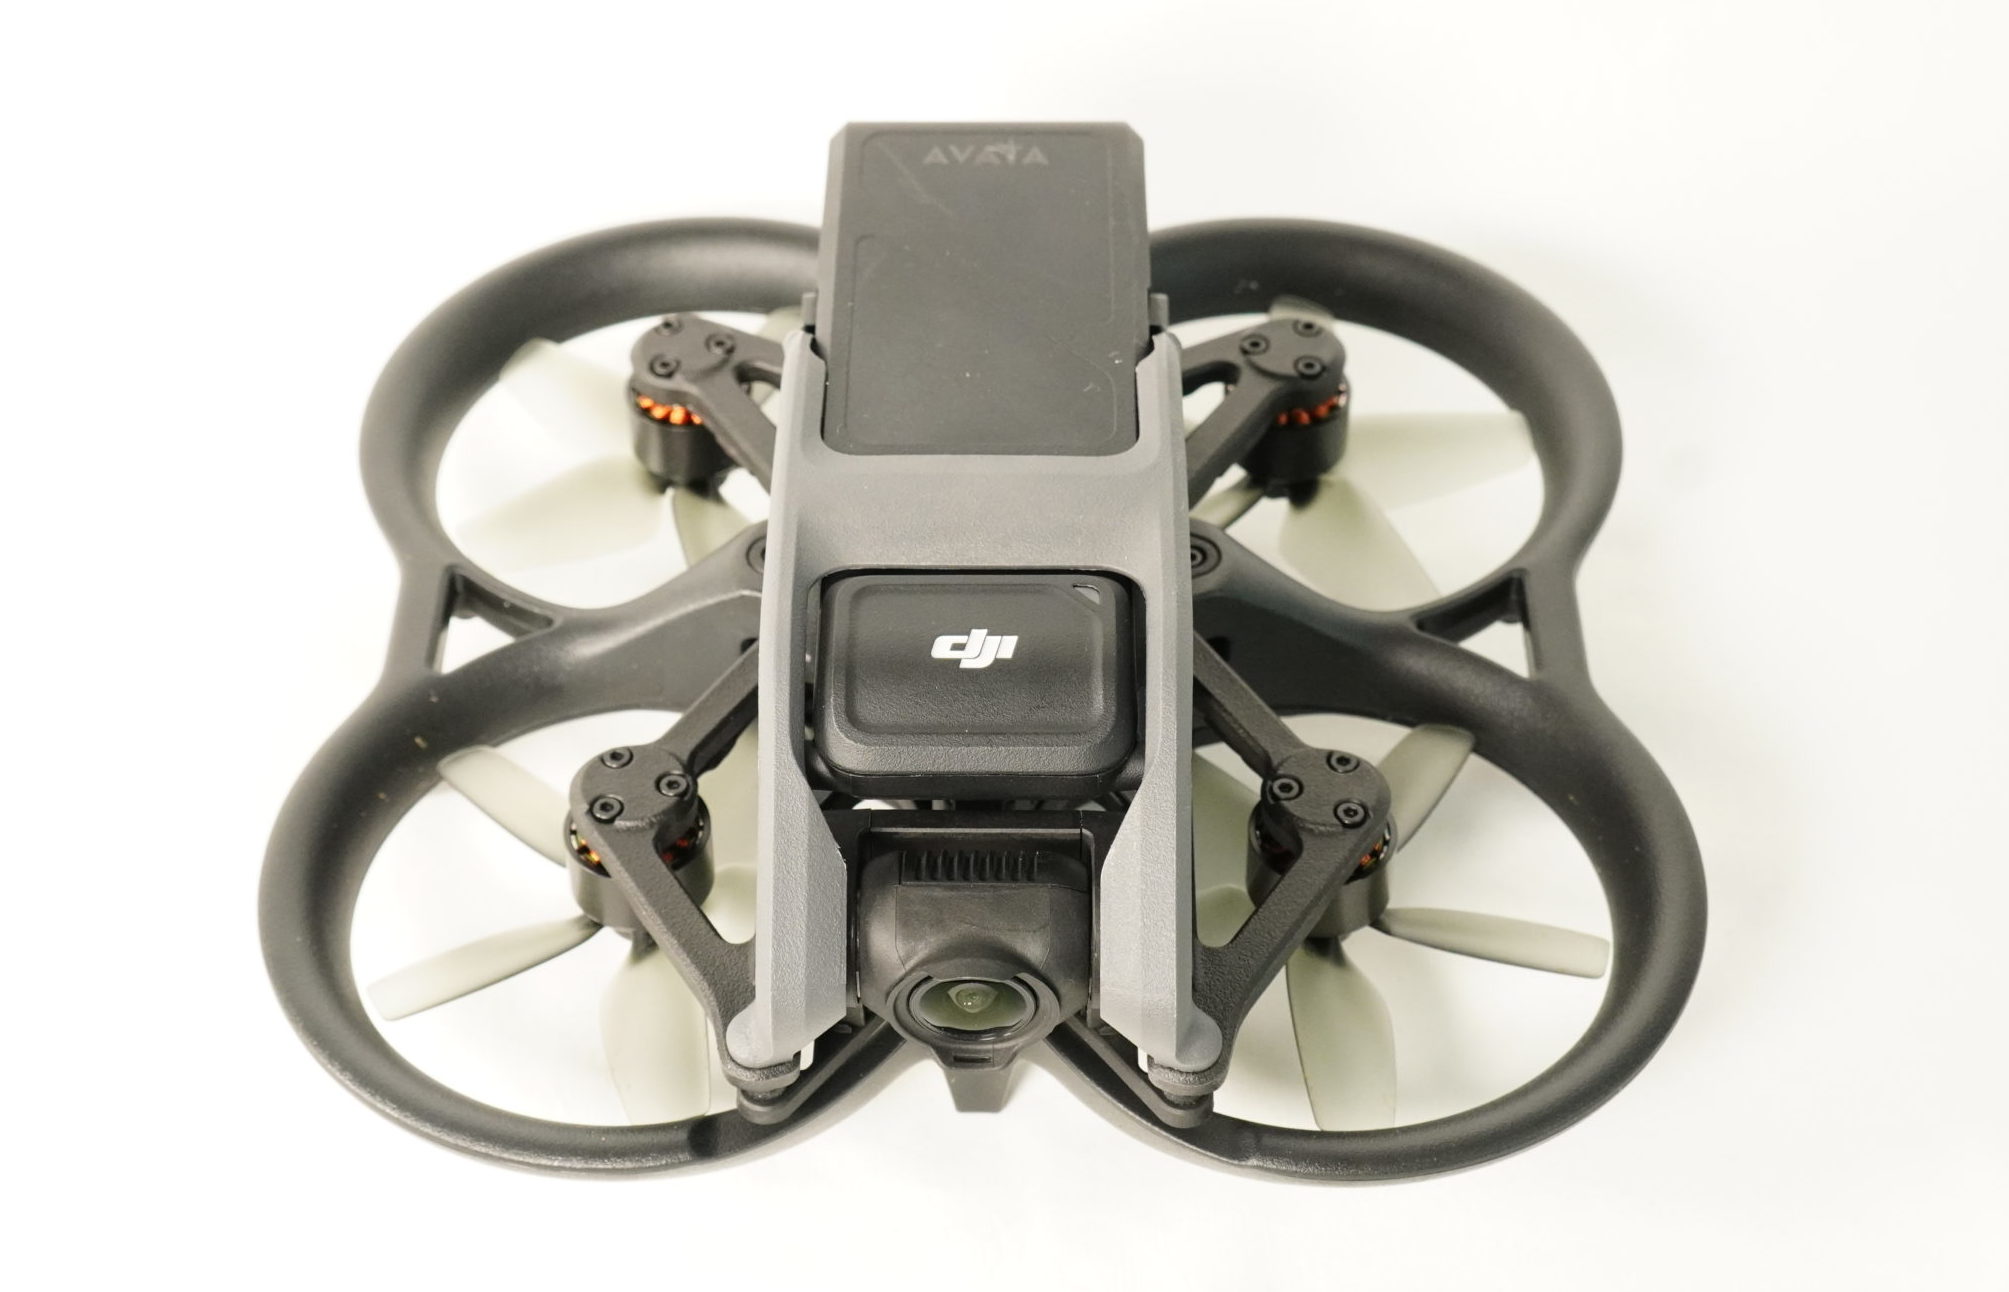 DJI Avata Review: The Cinewhoop Goes Mainstream | lupon.gov.ph